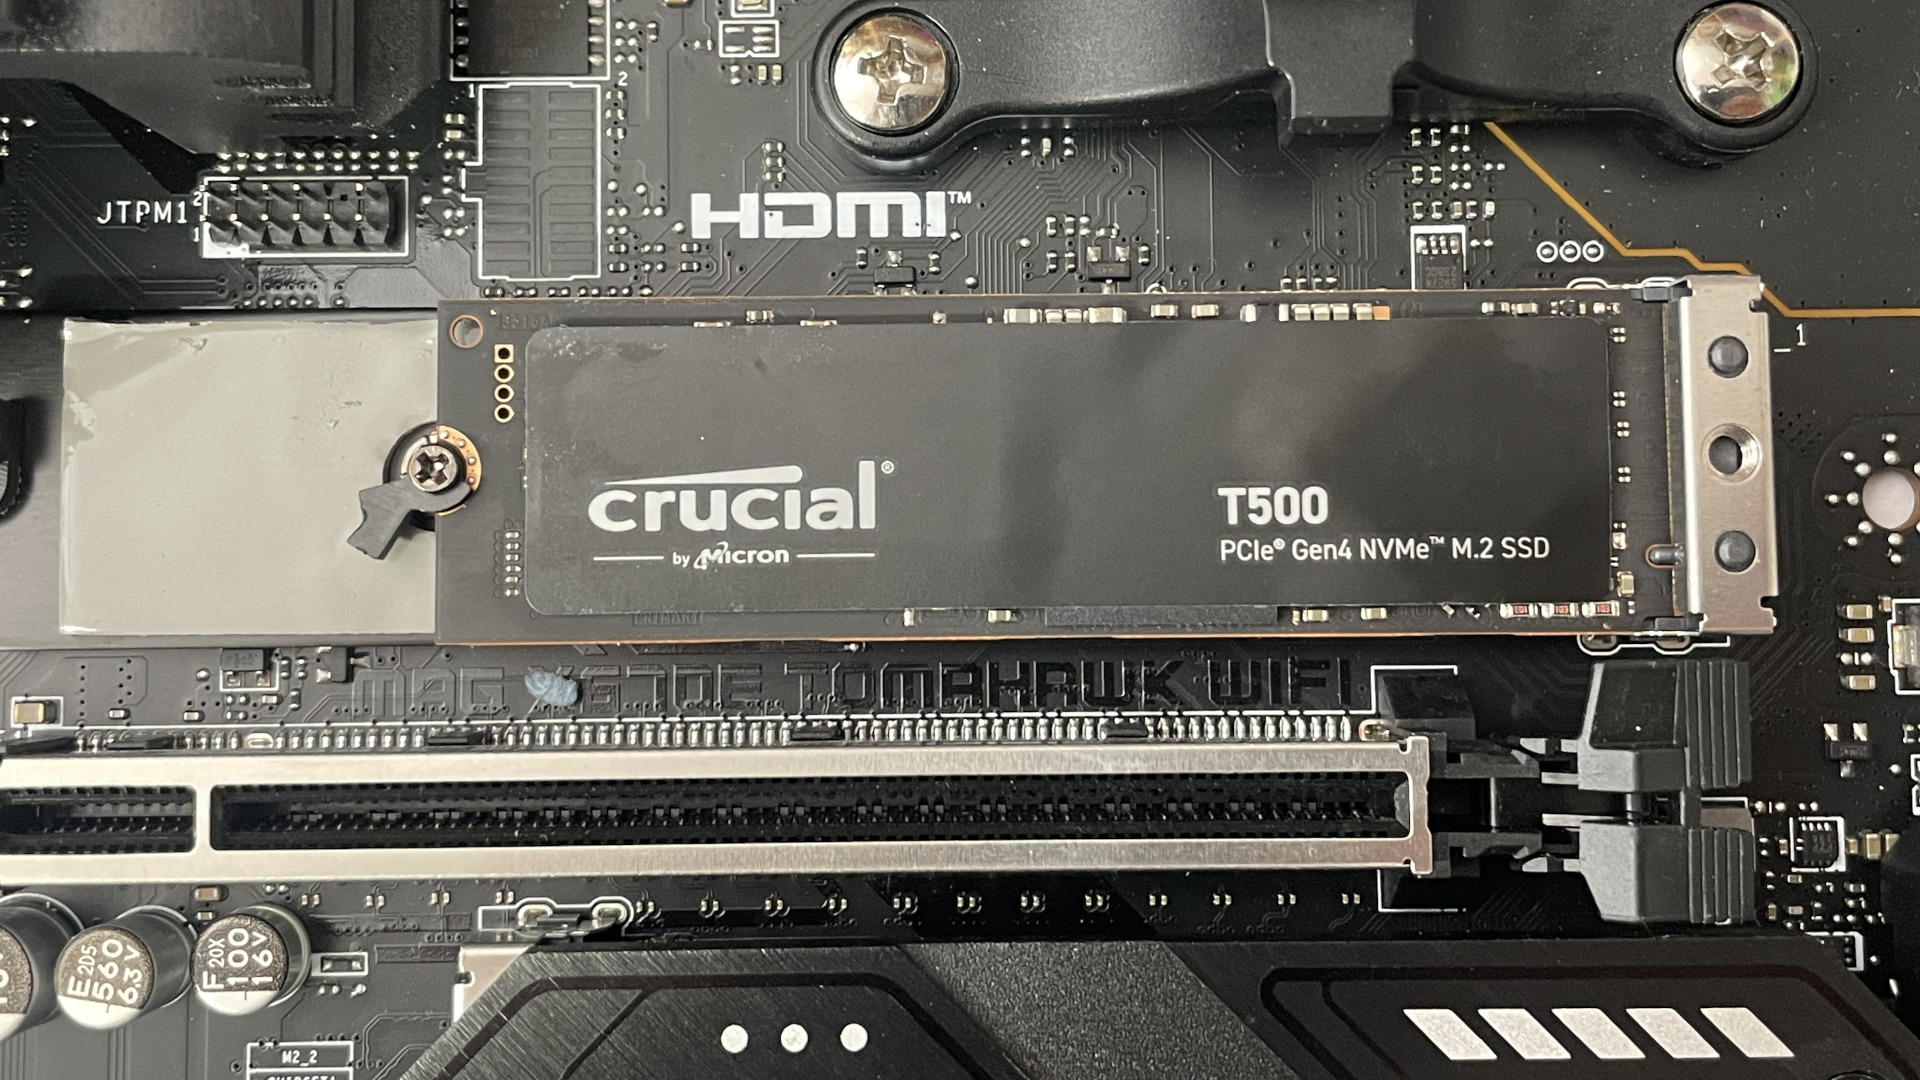 The Crucial T500 SSD seated in a motherboard